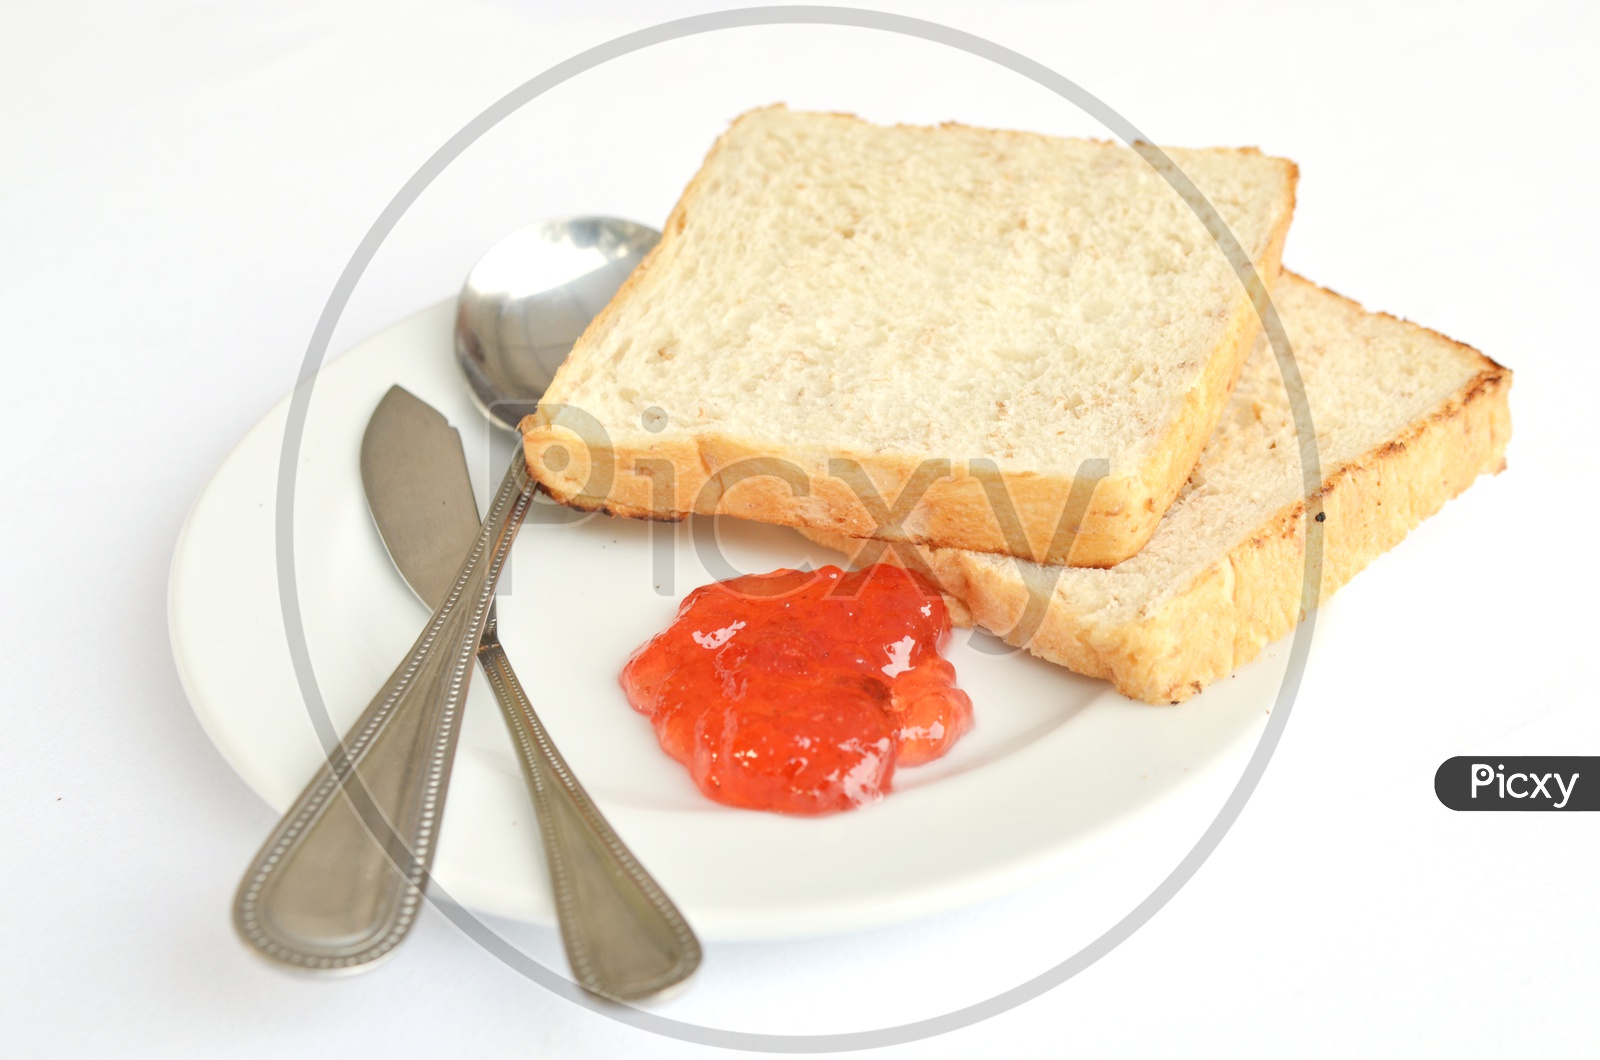 Bread Toast And Jam in a Plate